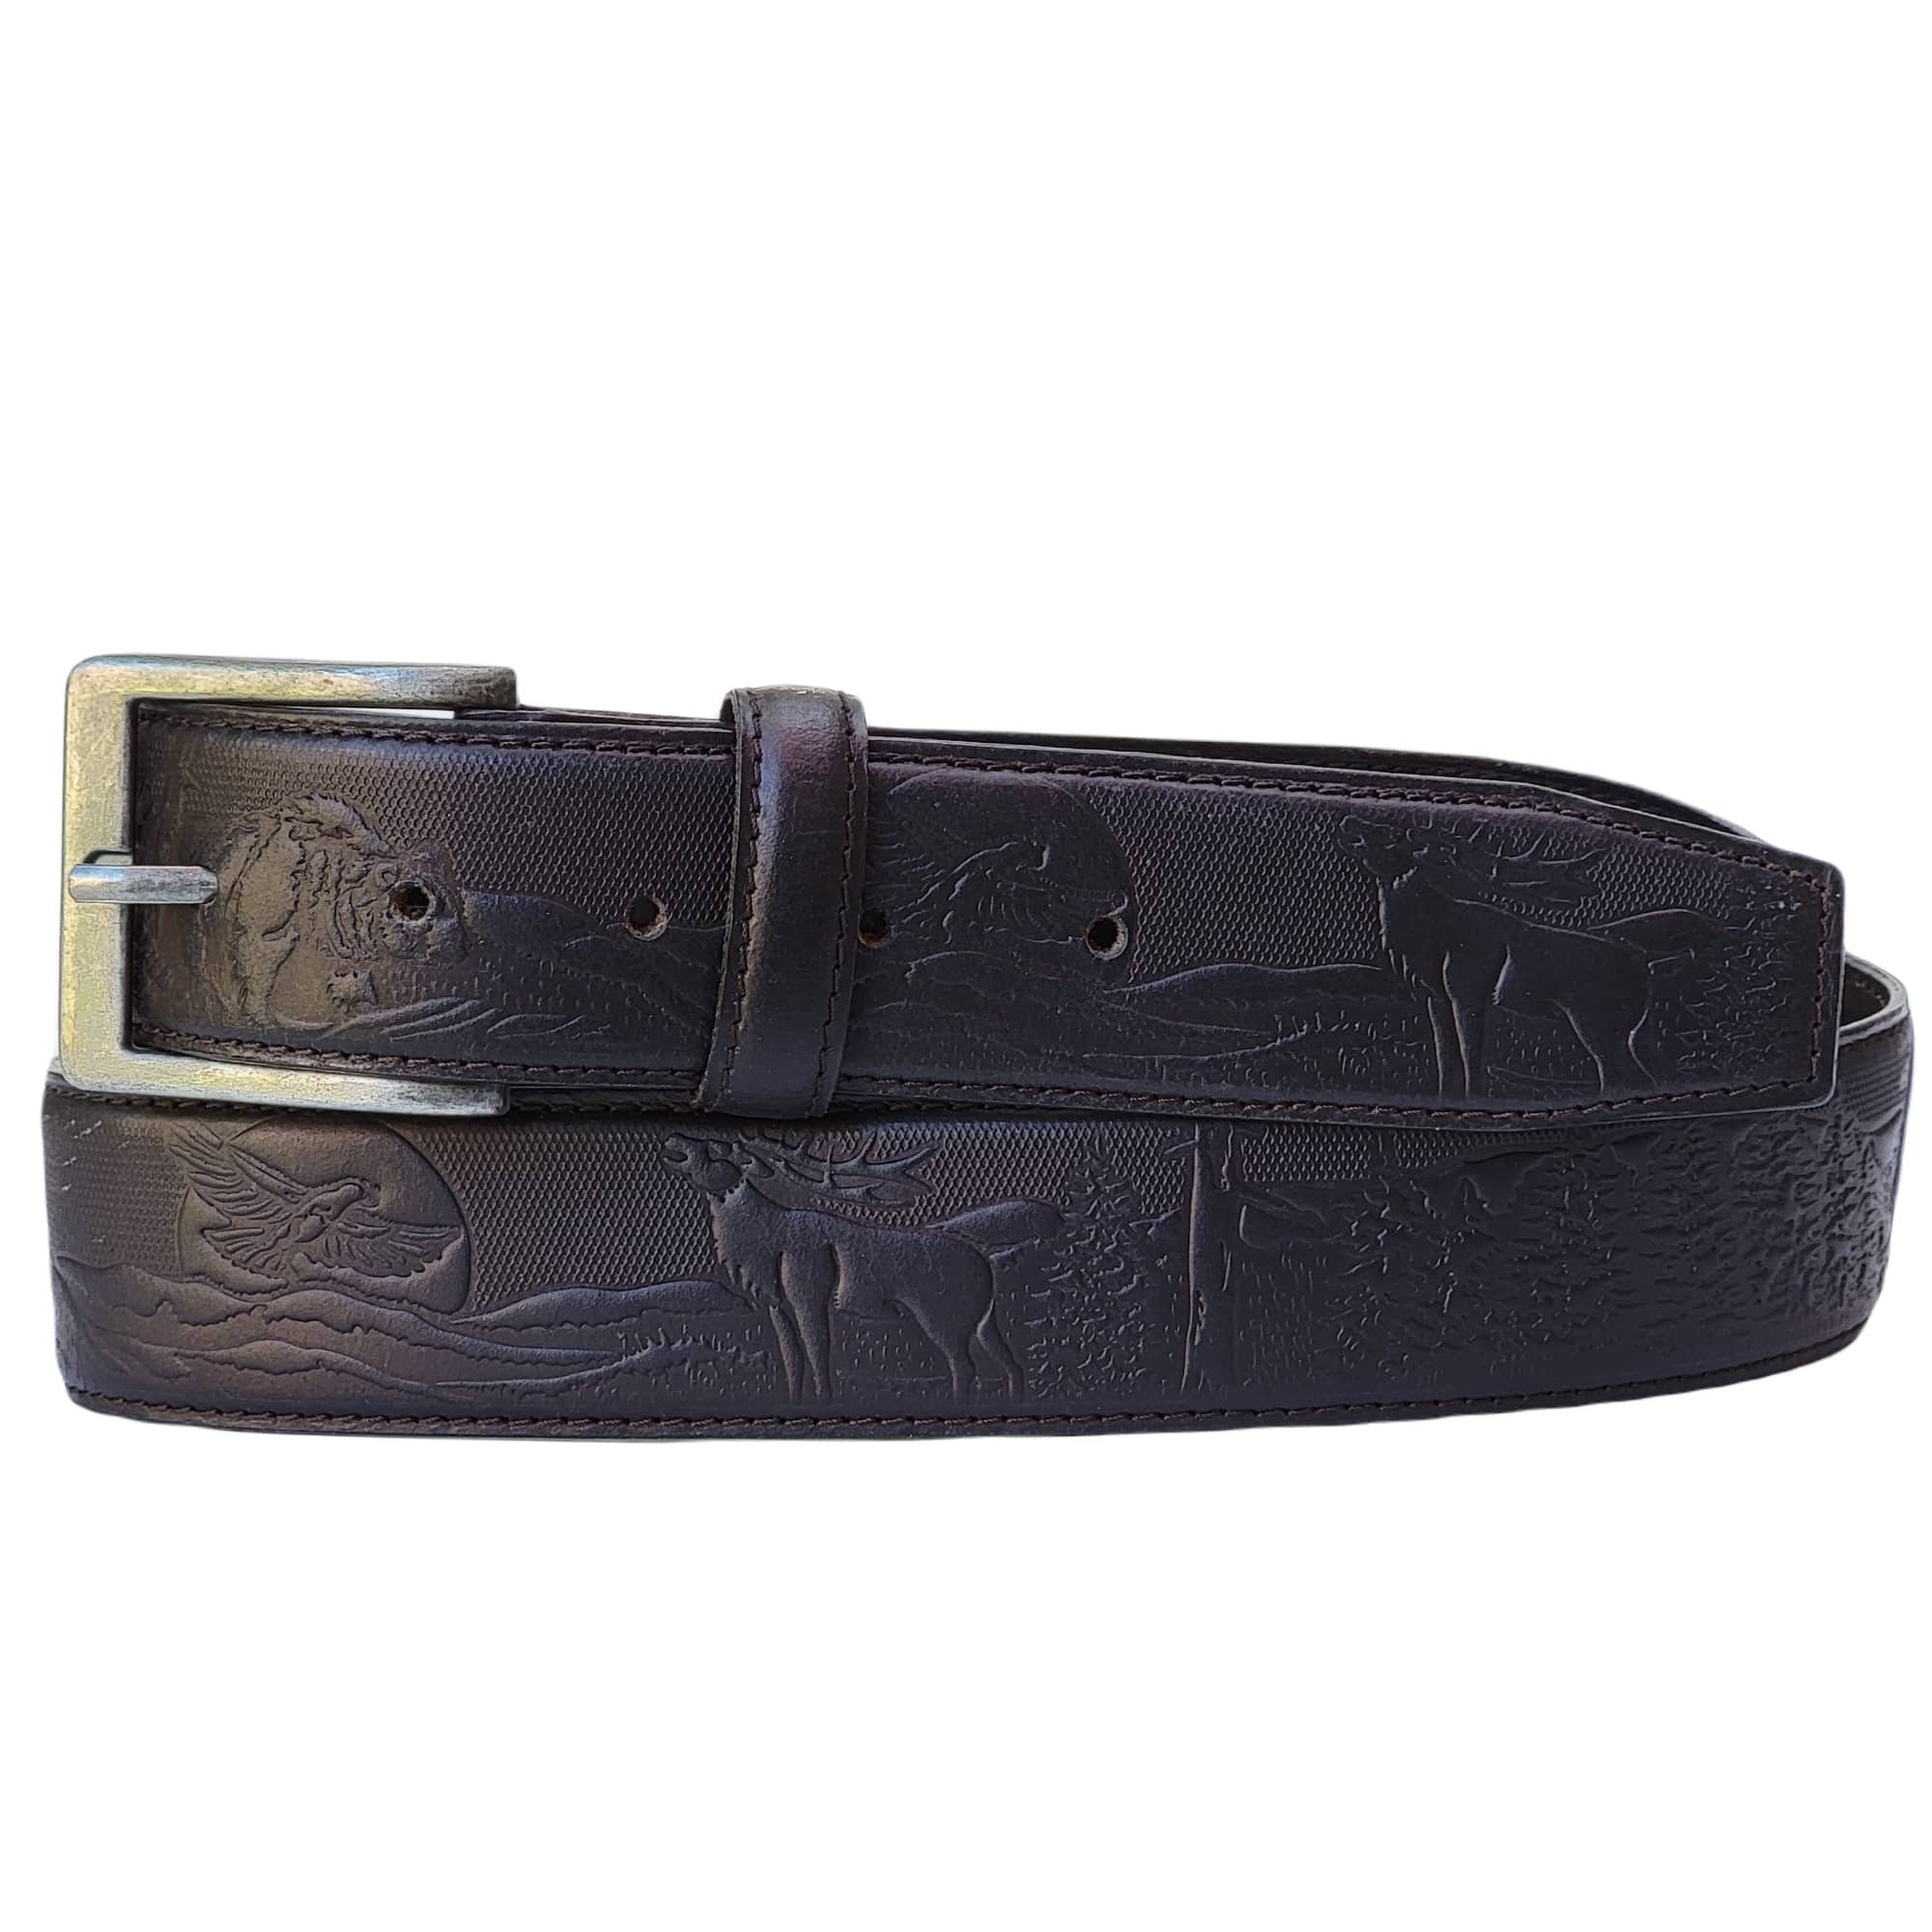 Embossed Leather Belt, HANDCRAFTED Embossed 100% Full Grain Leather Belt  Made in Canada, Wildlife Embossed, Gift for Him, Gift for Dad - Etsy